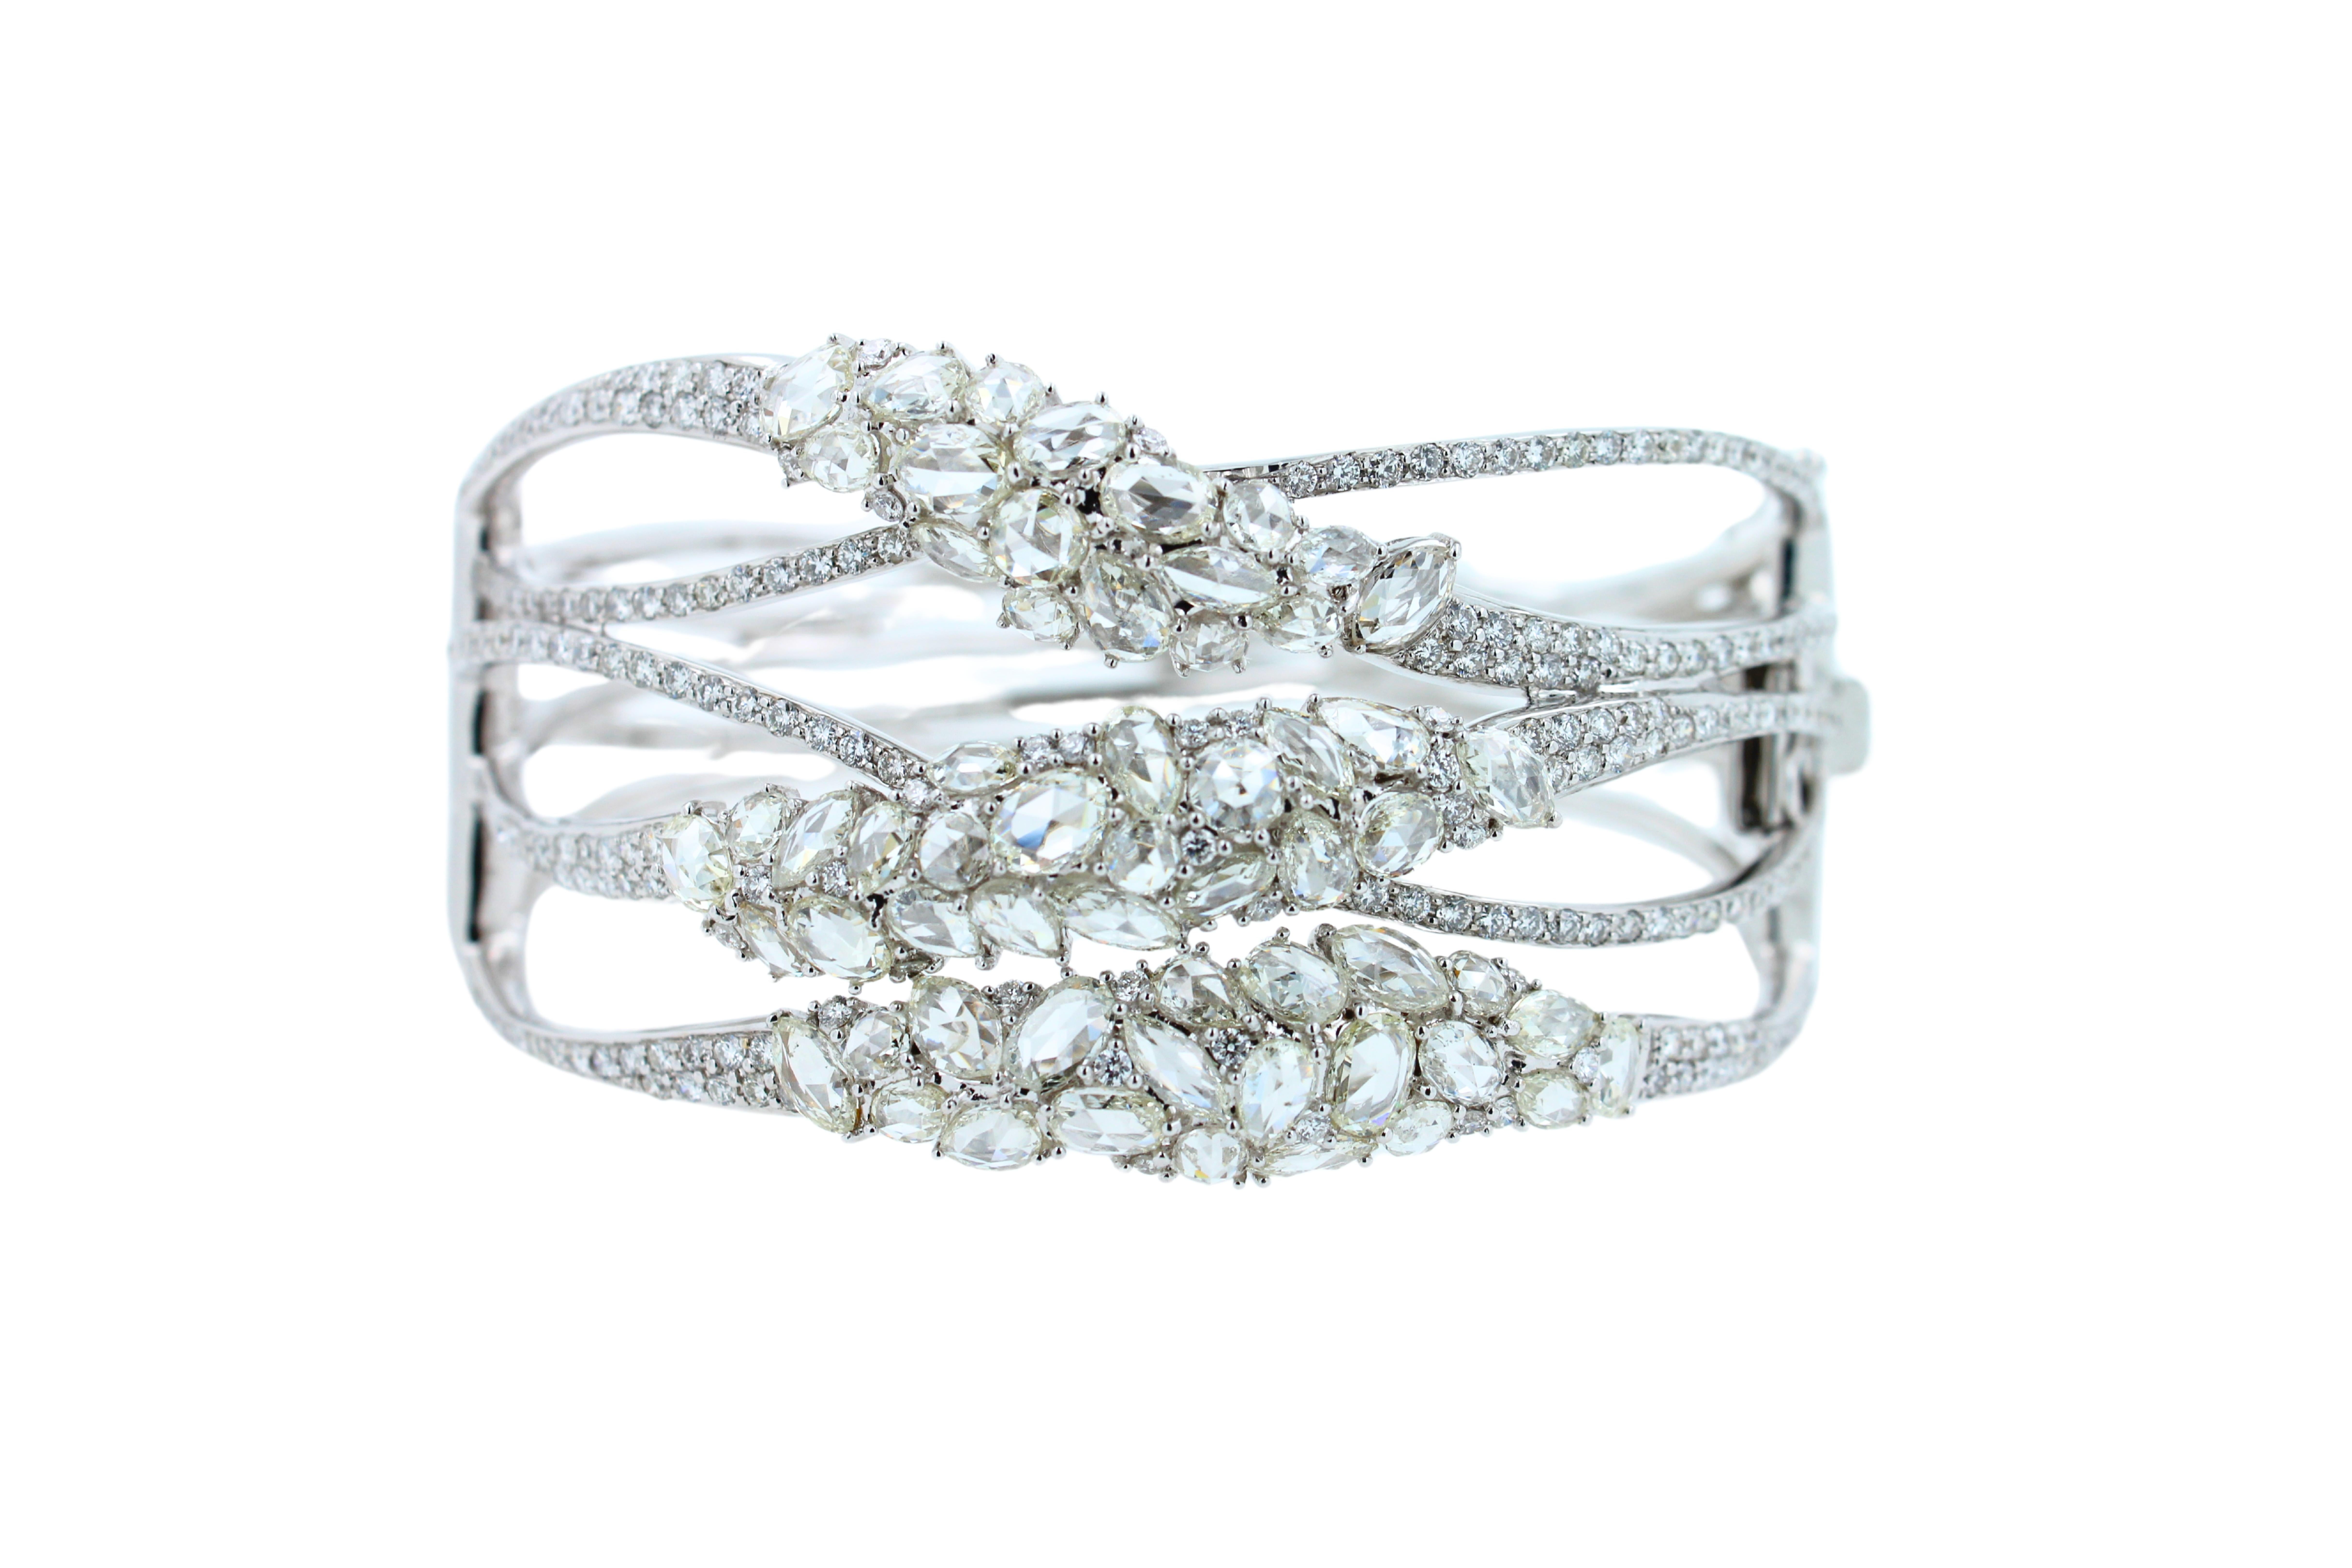 Diamond Bangle
14 CTW Diamonds G/VS Quality Grades +
18K White Gold
Fancy Shapes with Rose-Cut Facets 
Beautiful Work, Structure, Finish, Make
Will Fit Most Small to Larger Medium Size Wrists